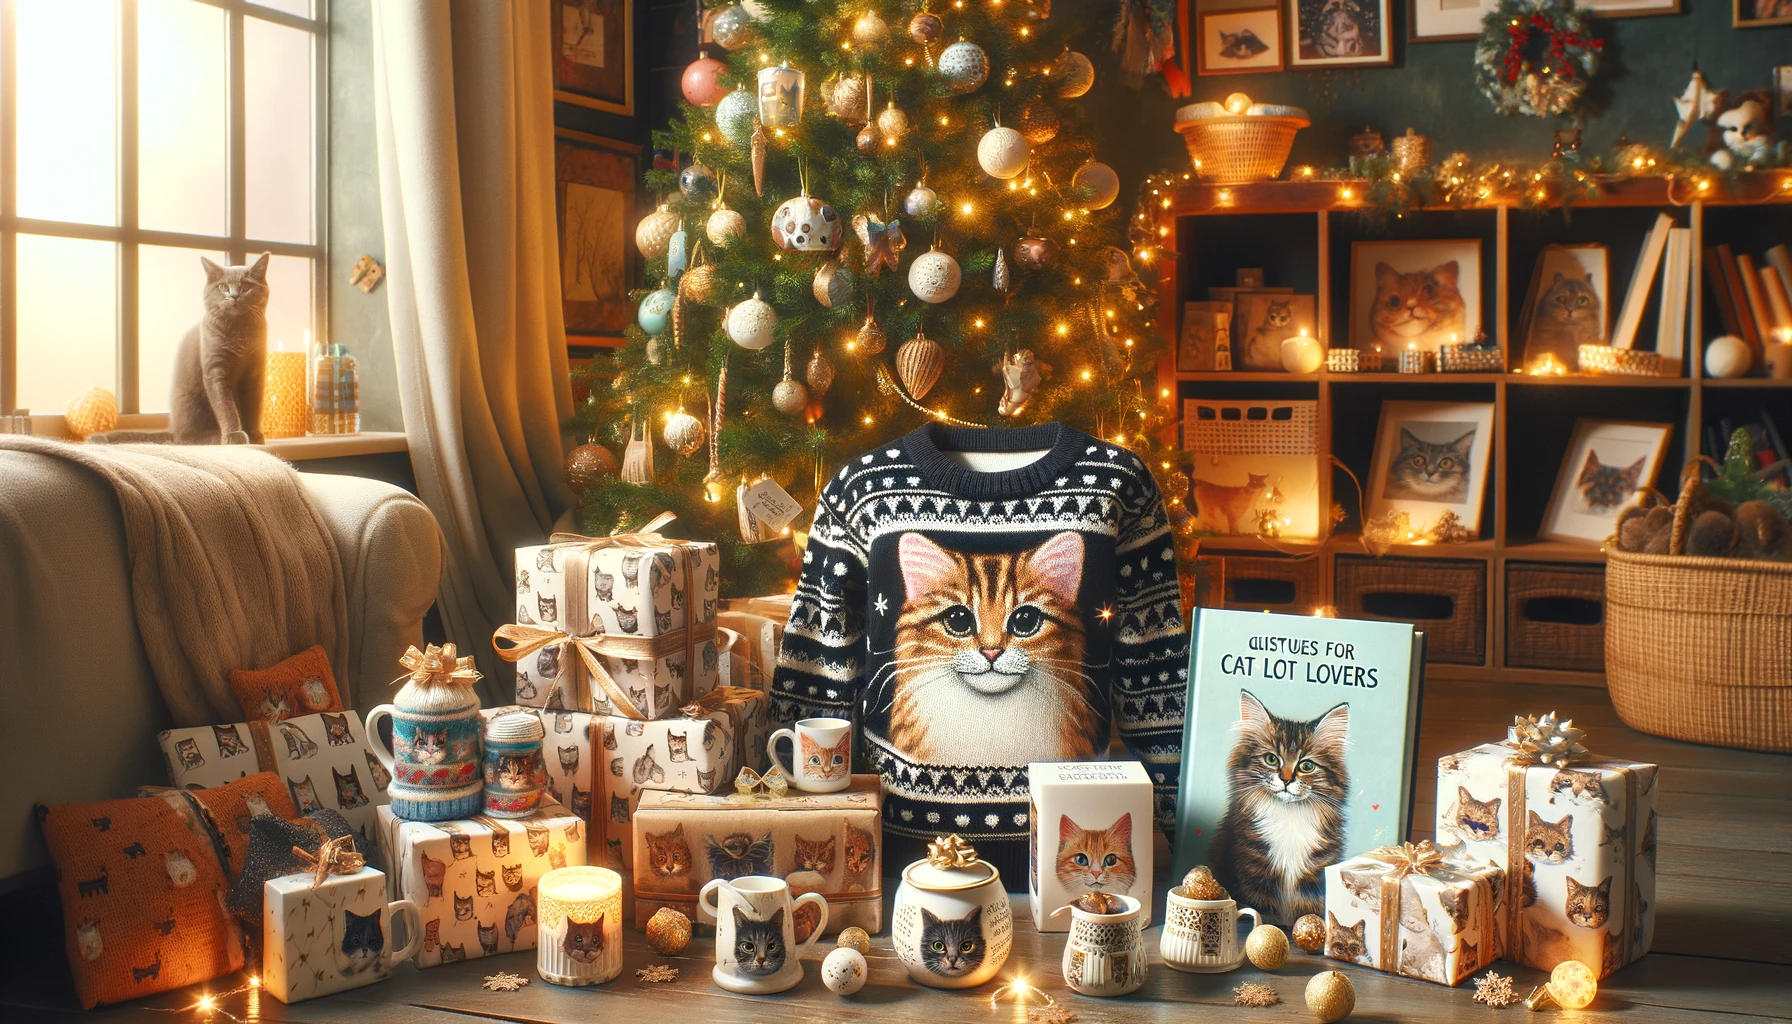 Purr-fect Presents: Christmas gifts for cat lovers